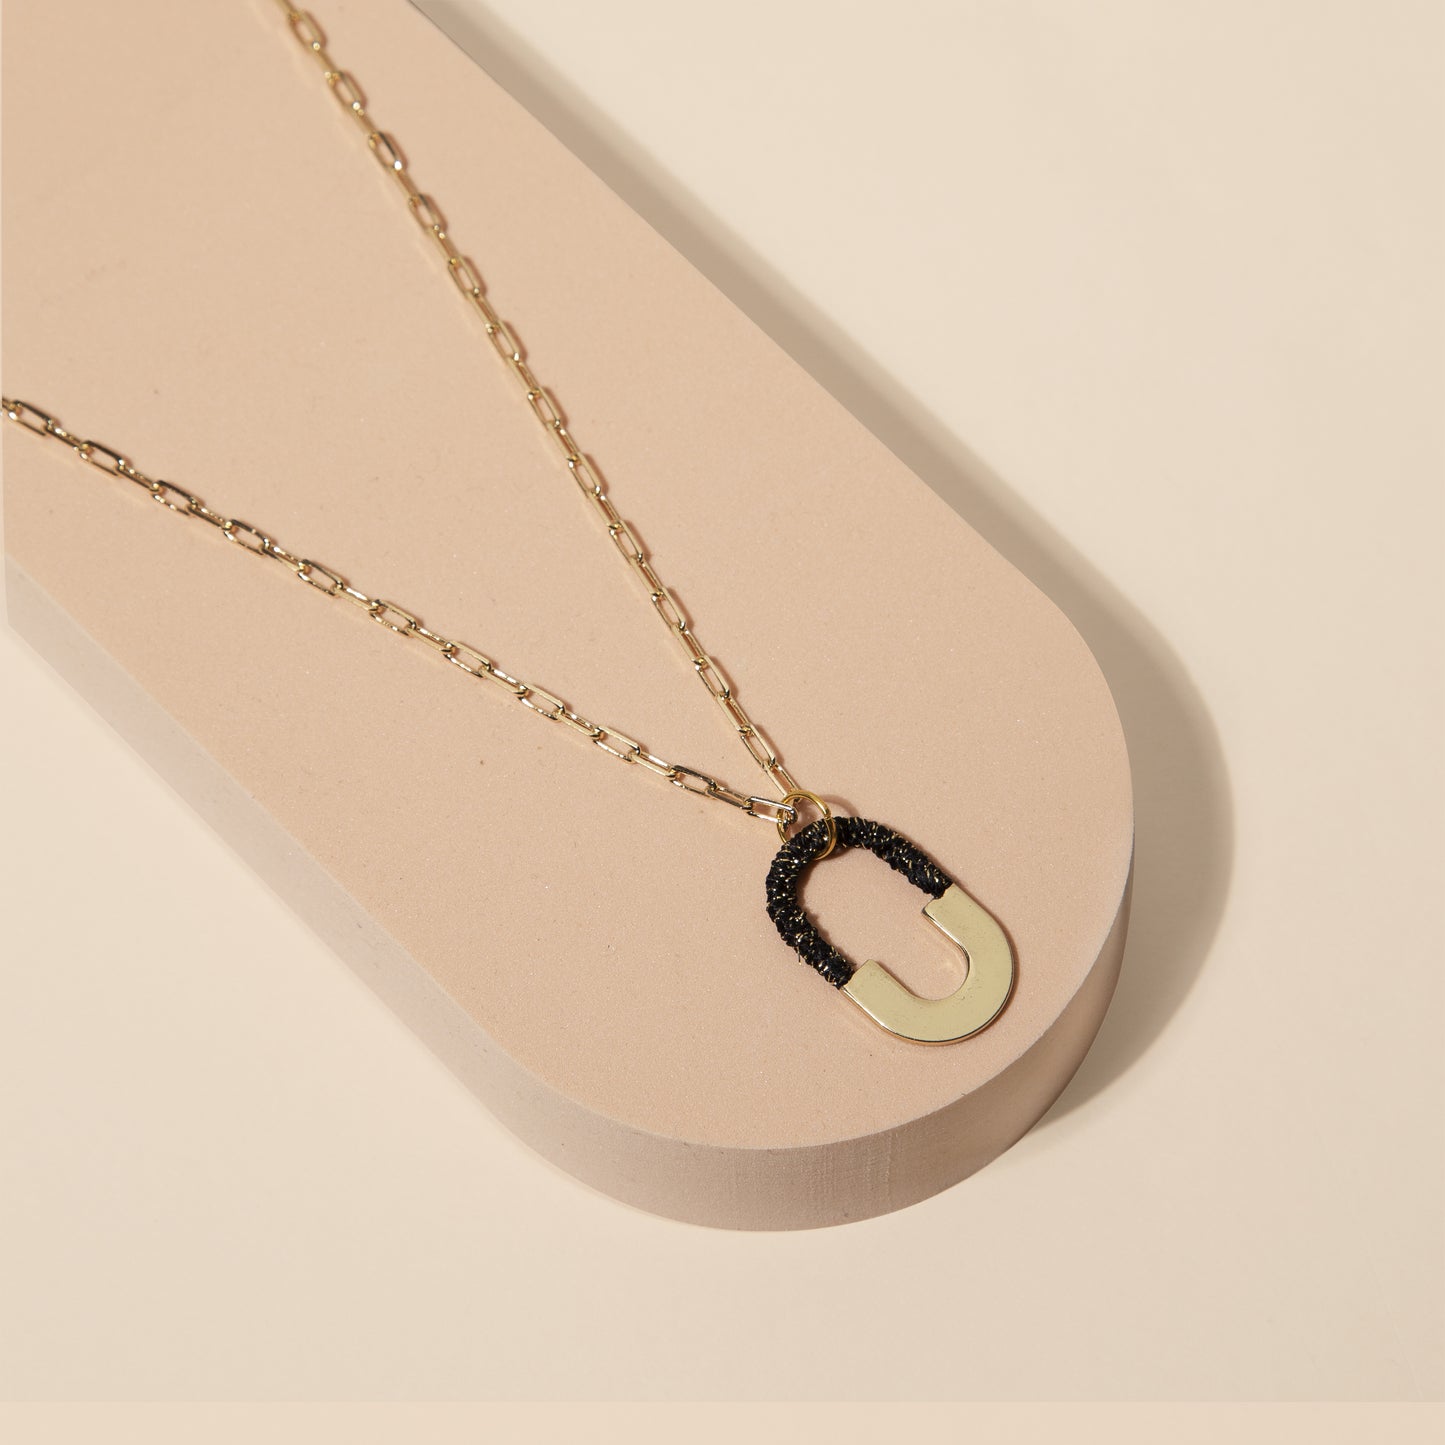 Fibre and alloy oval chain necklace - knottinger.